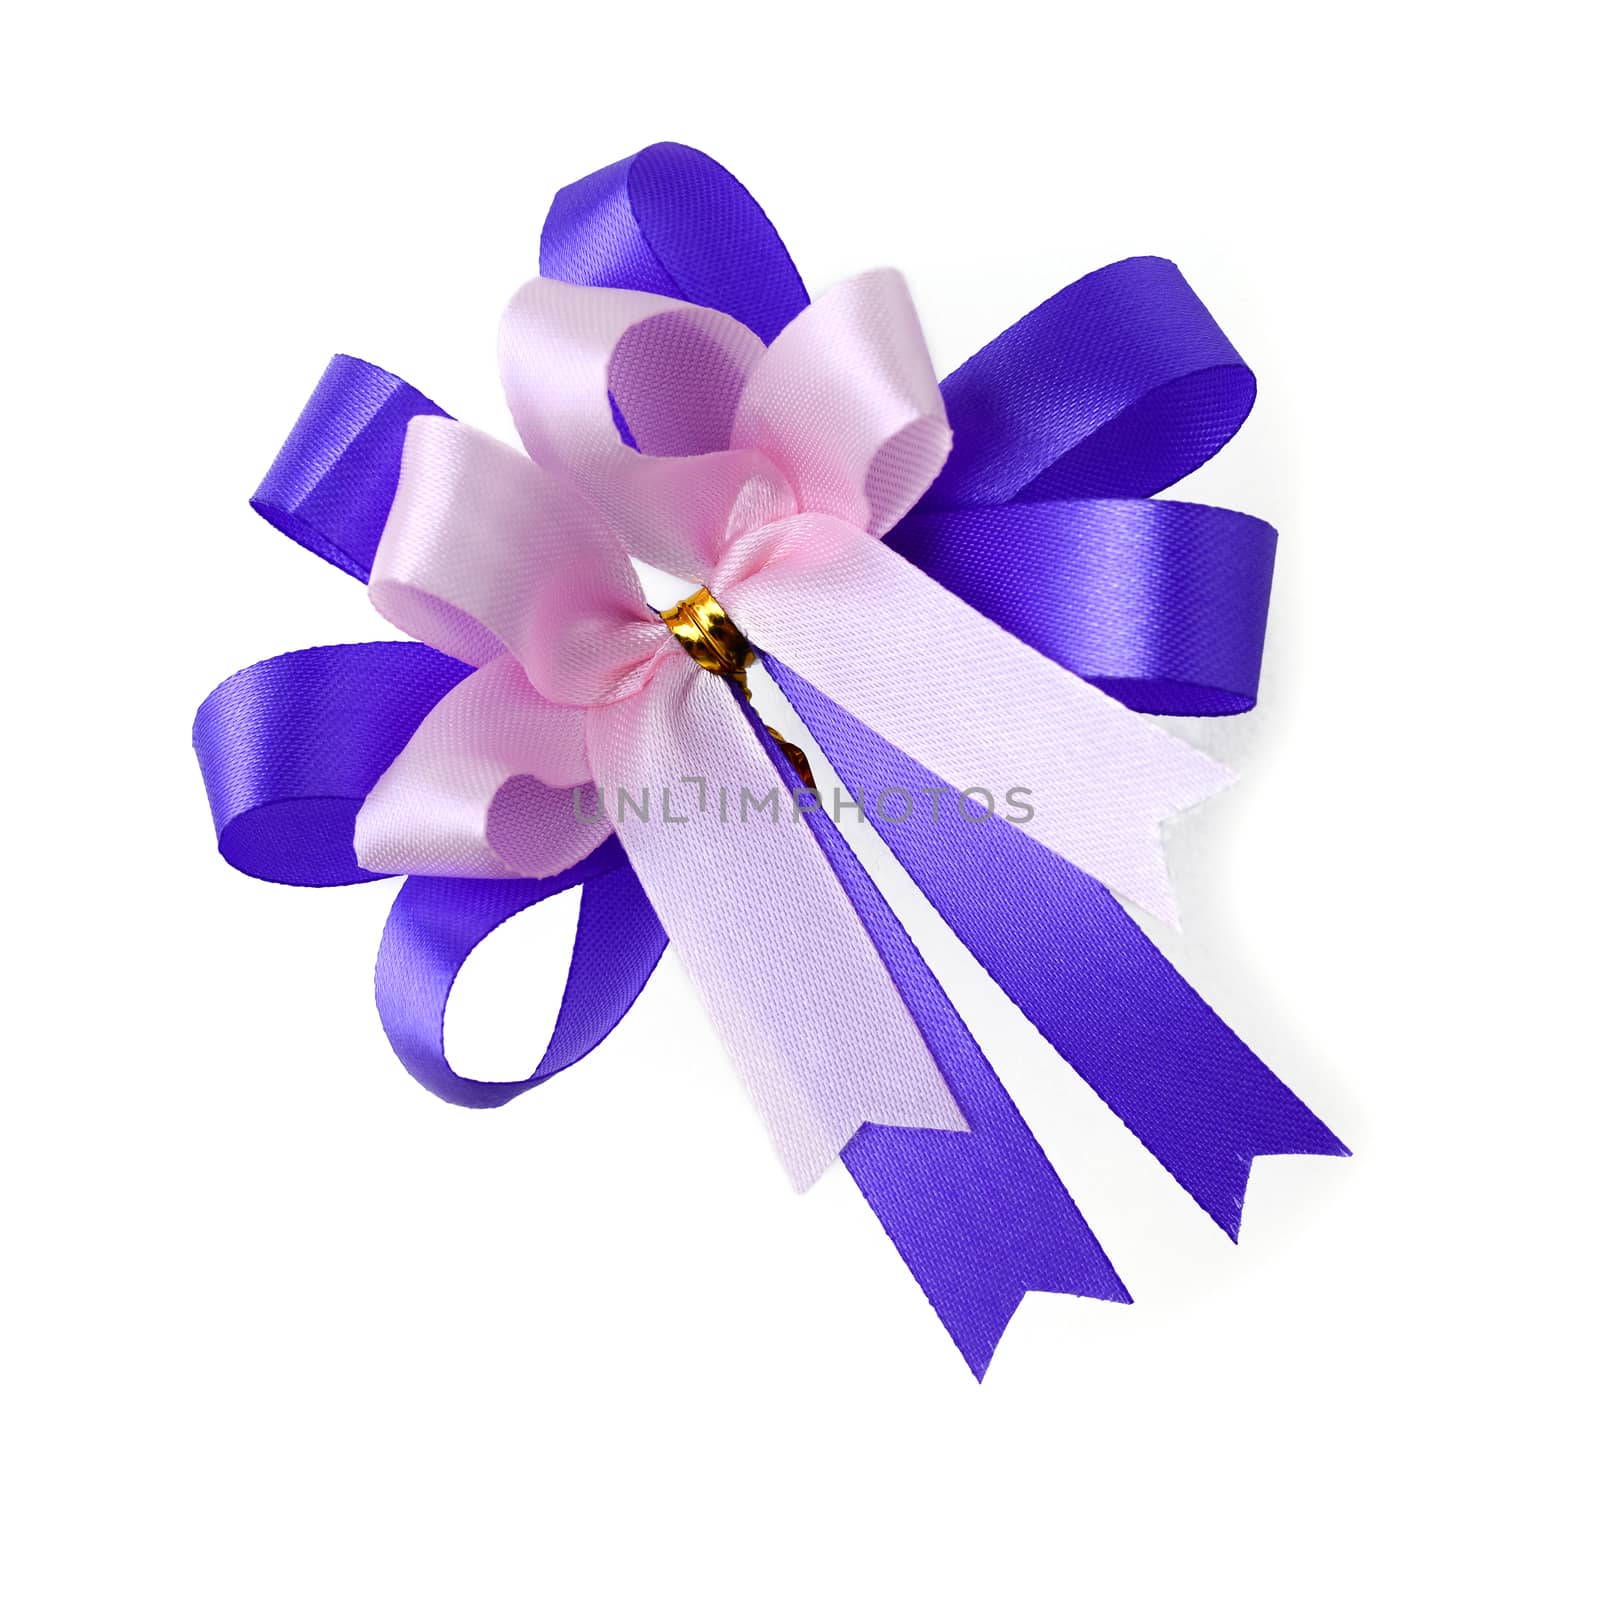 gift bow isolated